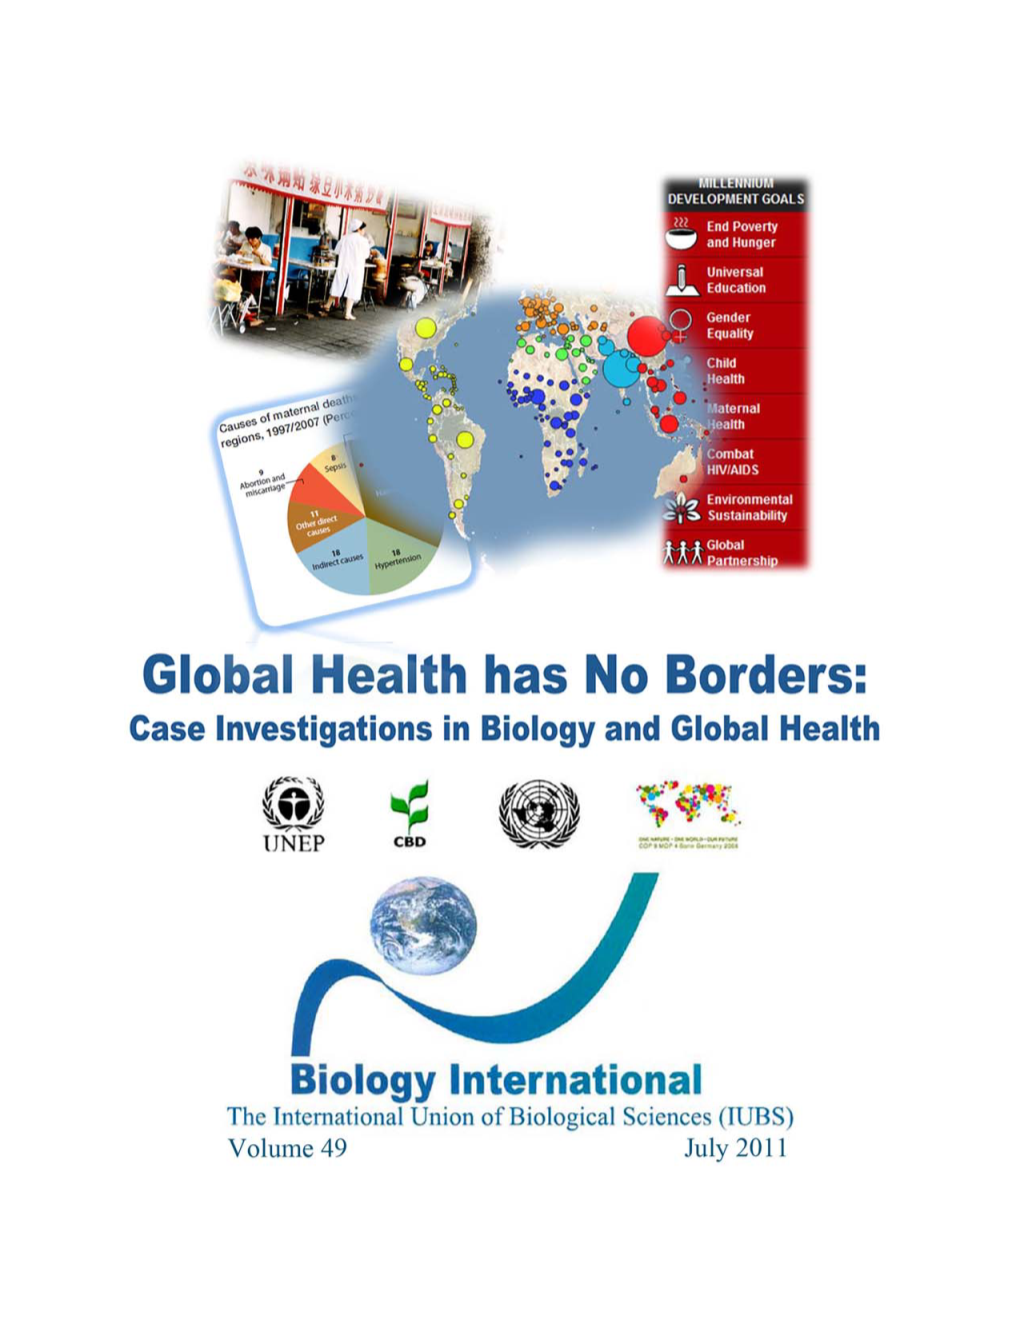 BIOLOGY INTERNATIONAL the Official Journal of the International Union of Biological Sciences